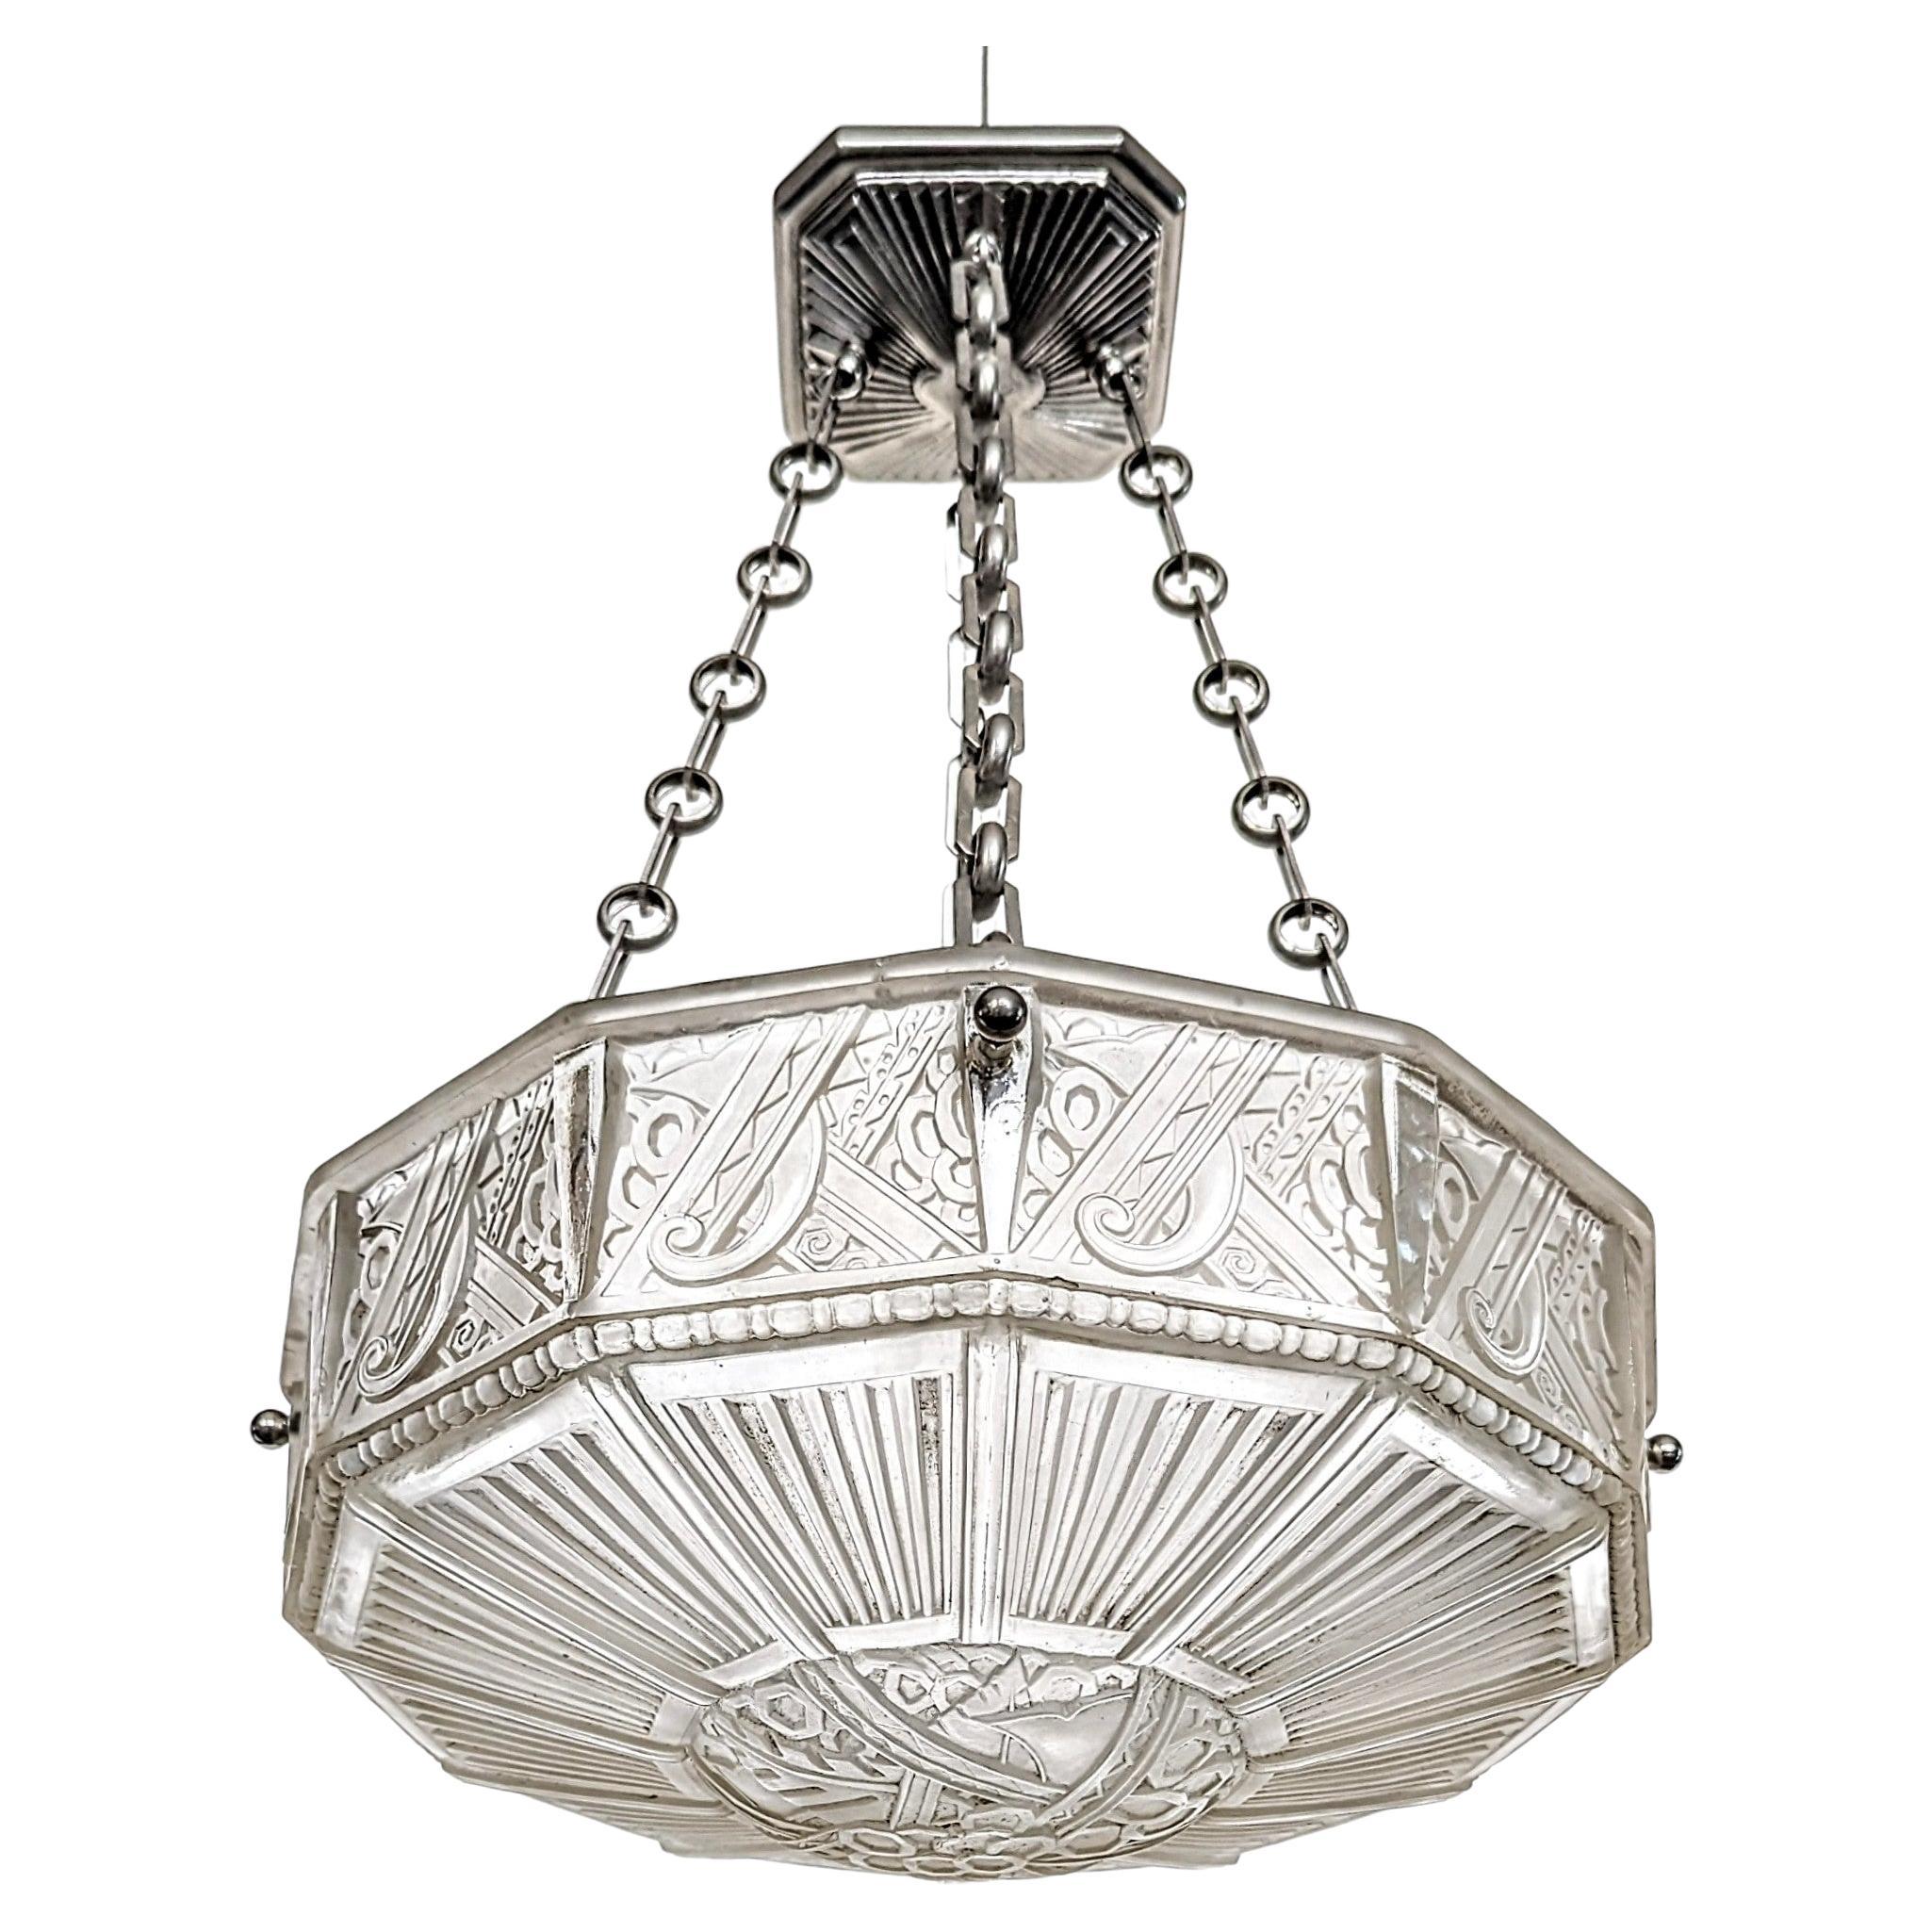 A stunning unique French Art Deco pendant chandelier created by 